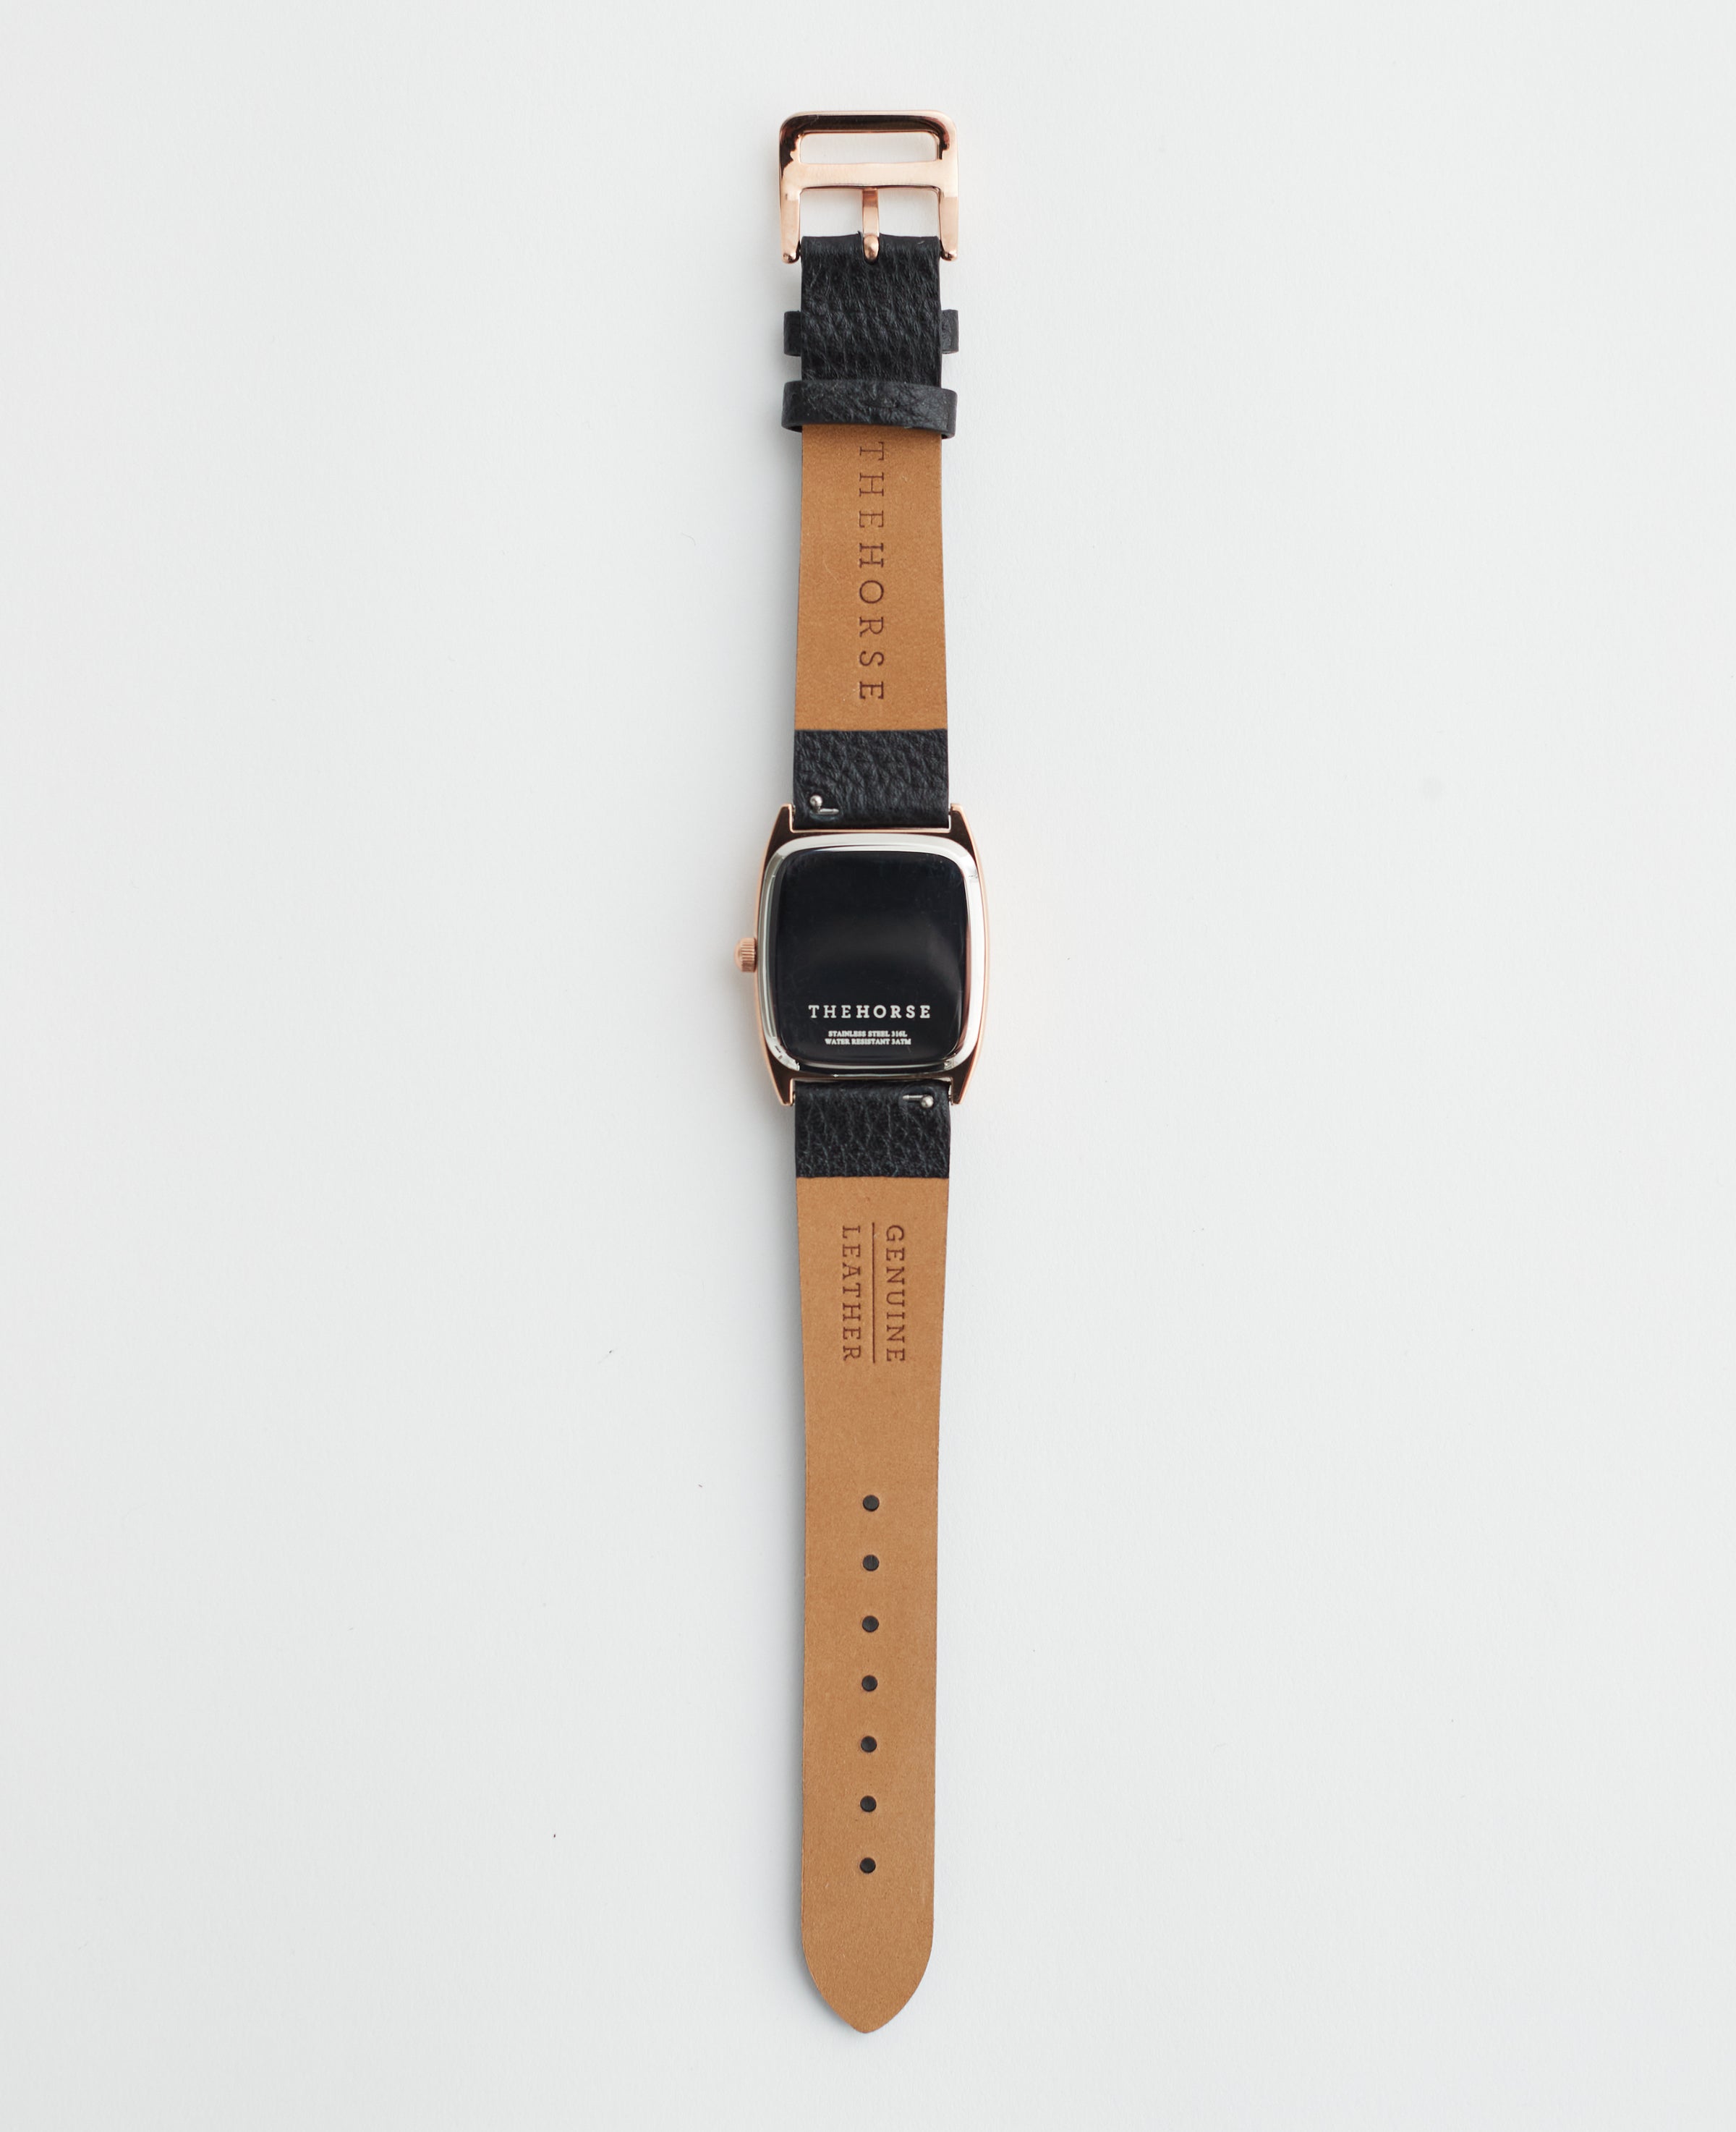 The Dress Watch: Rose Gold / Black Dial / Black Leather